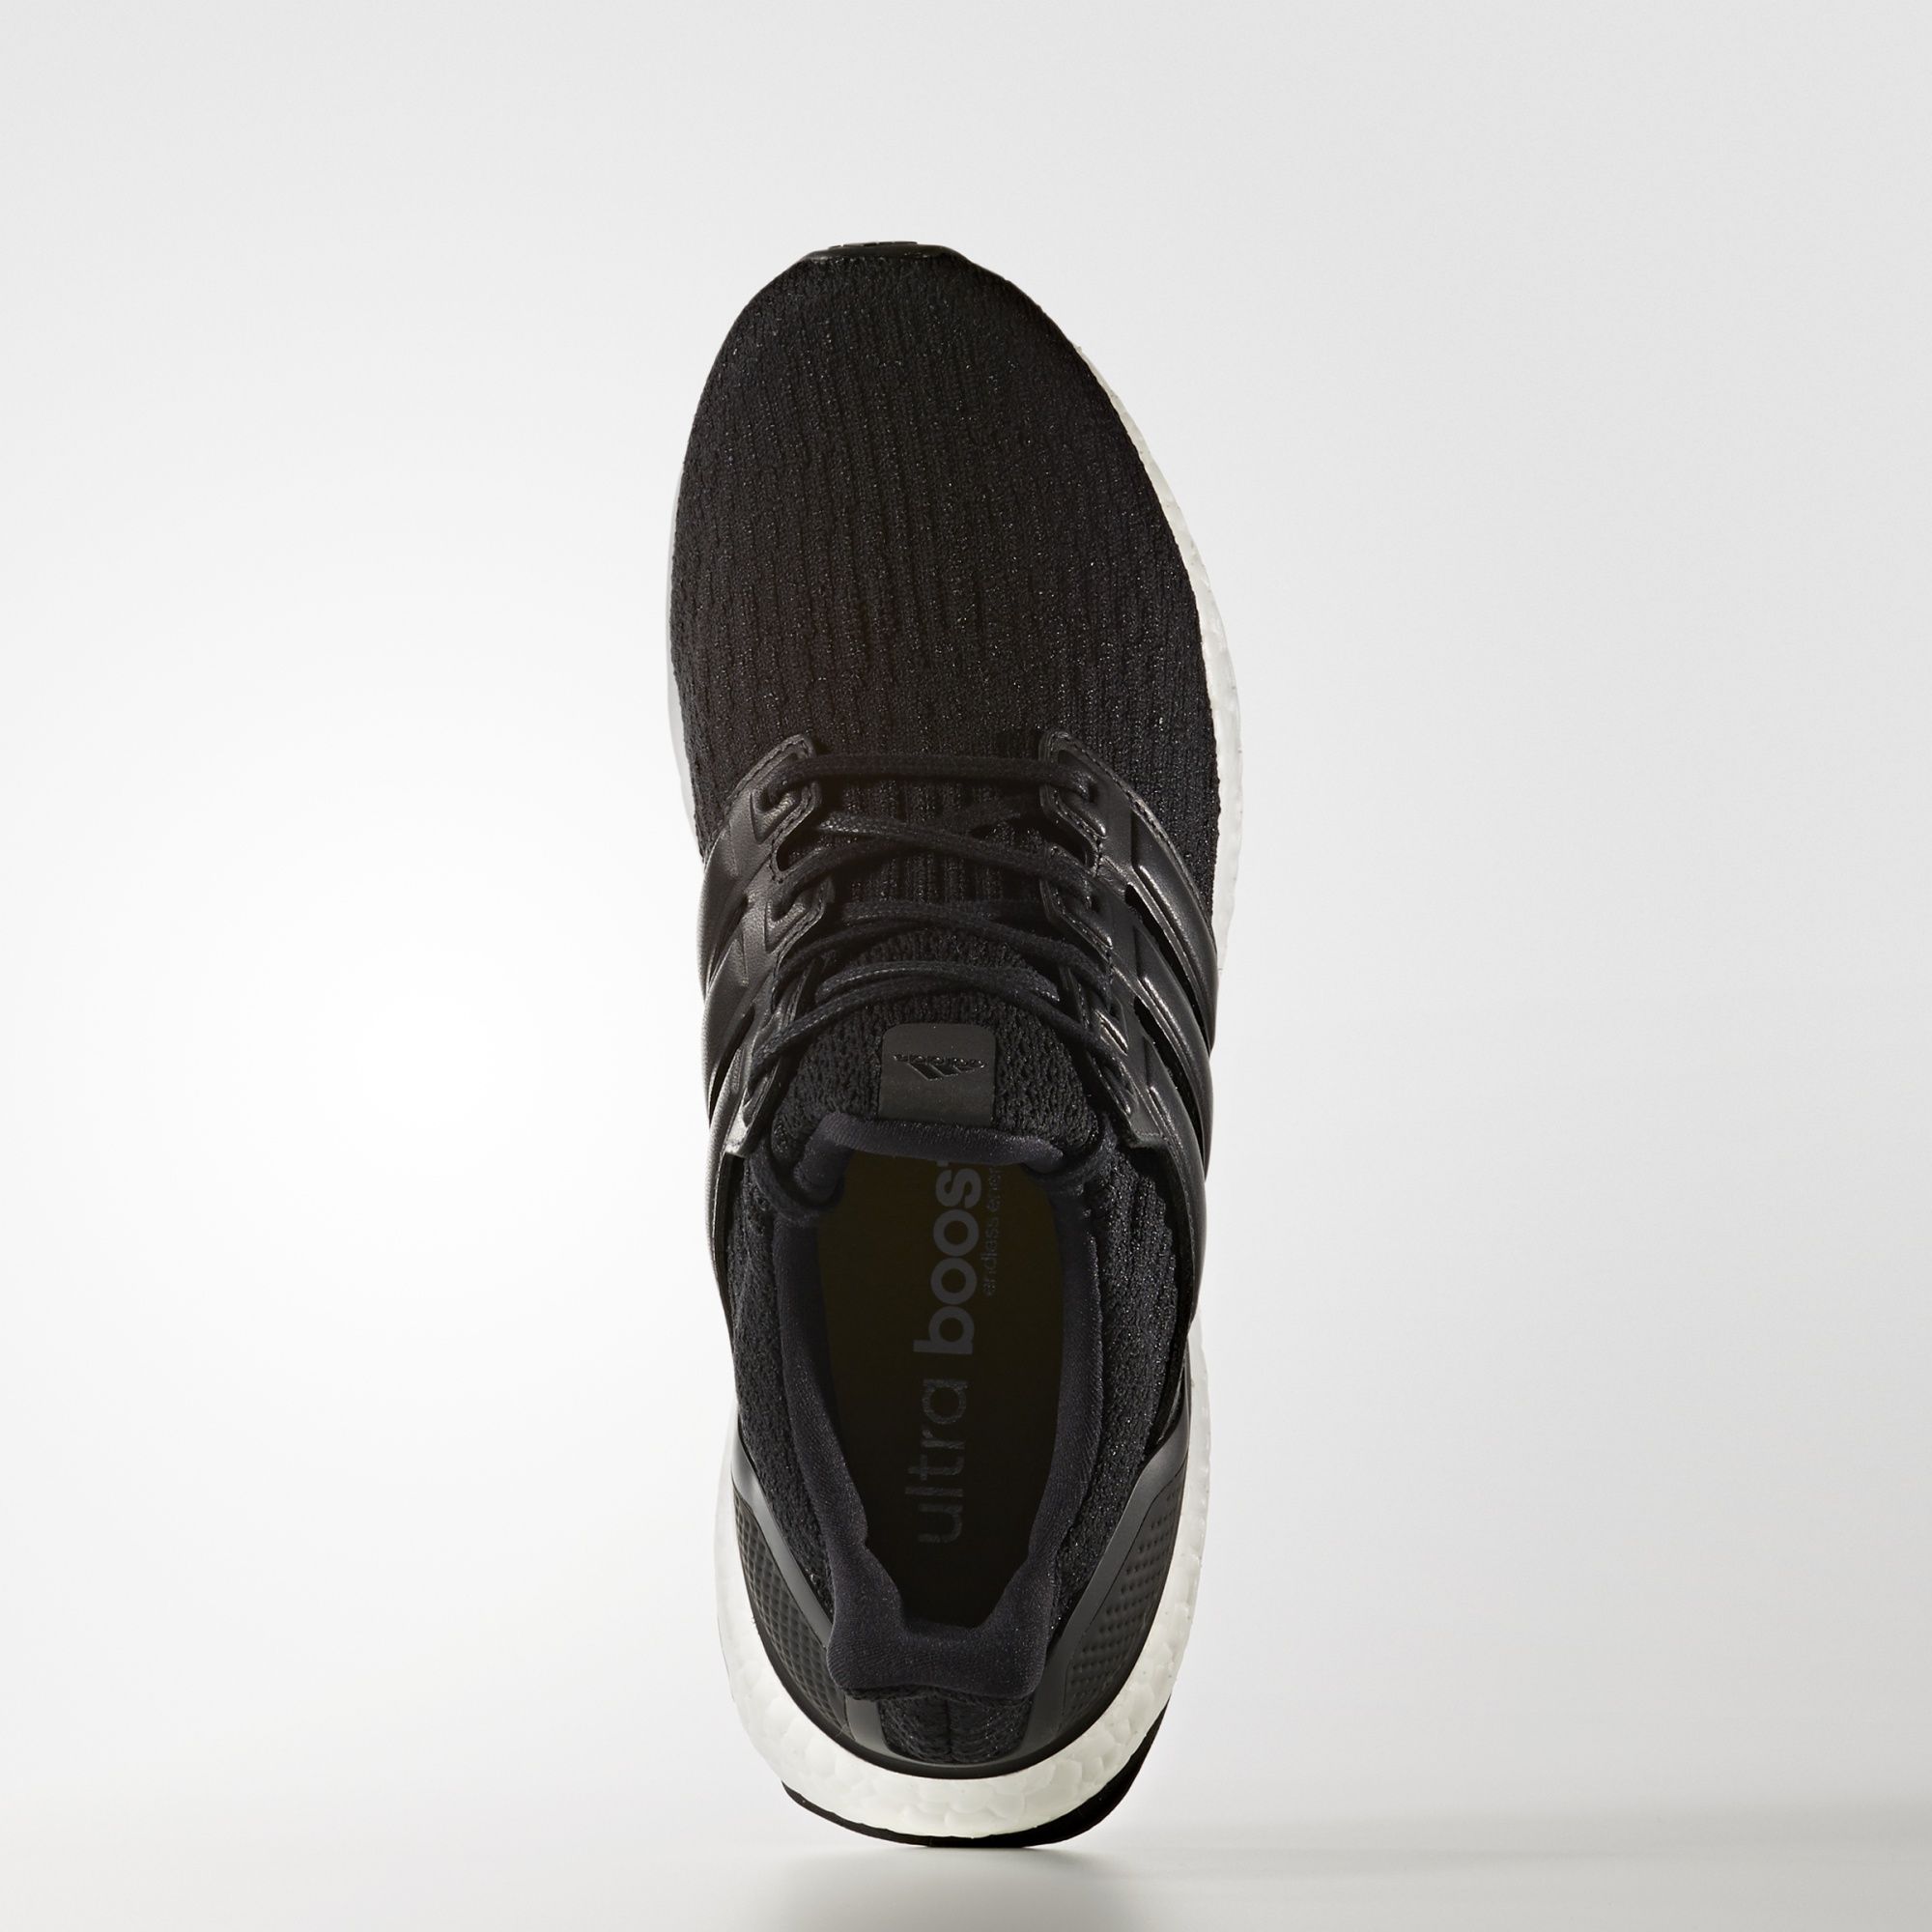 Adidas Ultra Boost
Limited-Edition
Core Black